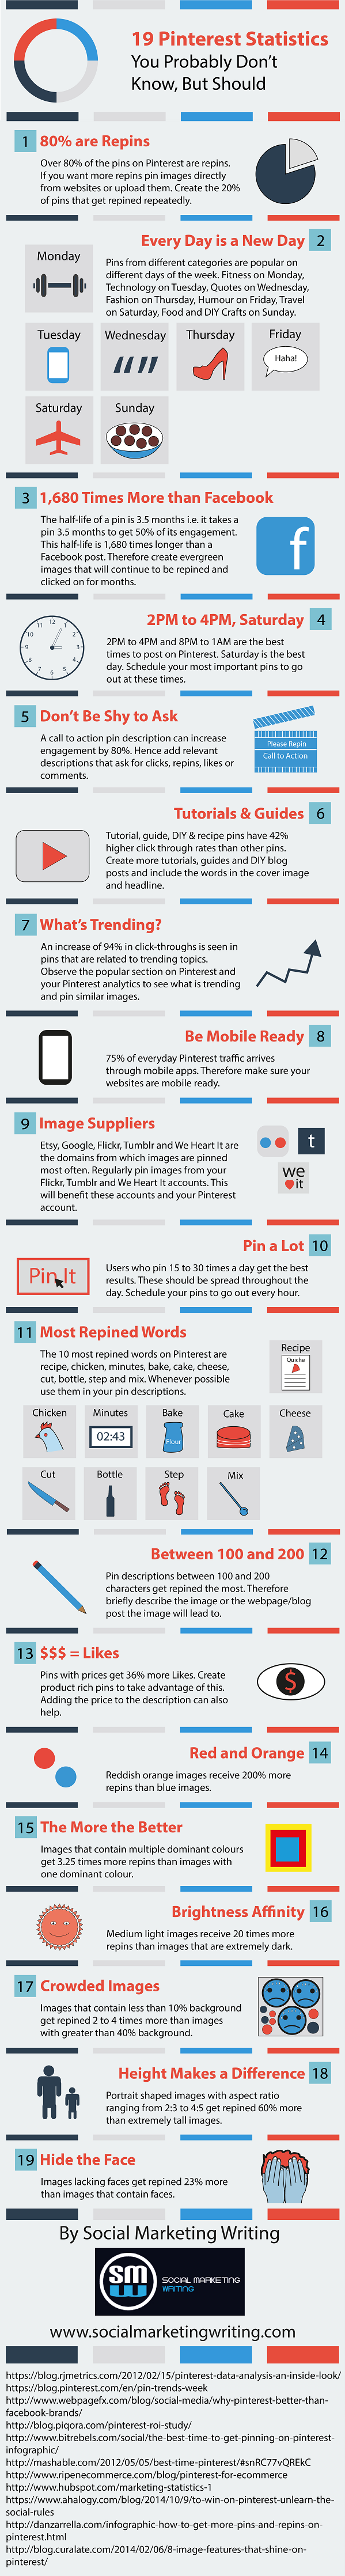 https://socialmarketingwriting.com/wp-content/uploads/2015/09/19-Pinterest-Statistics-You-Probably-Don%E2%80%99t-Know-But-Should-Infographic.png